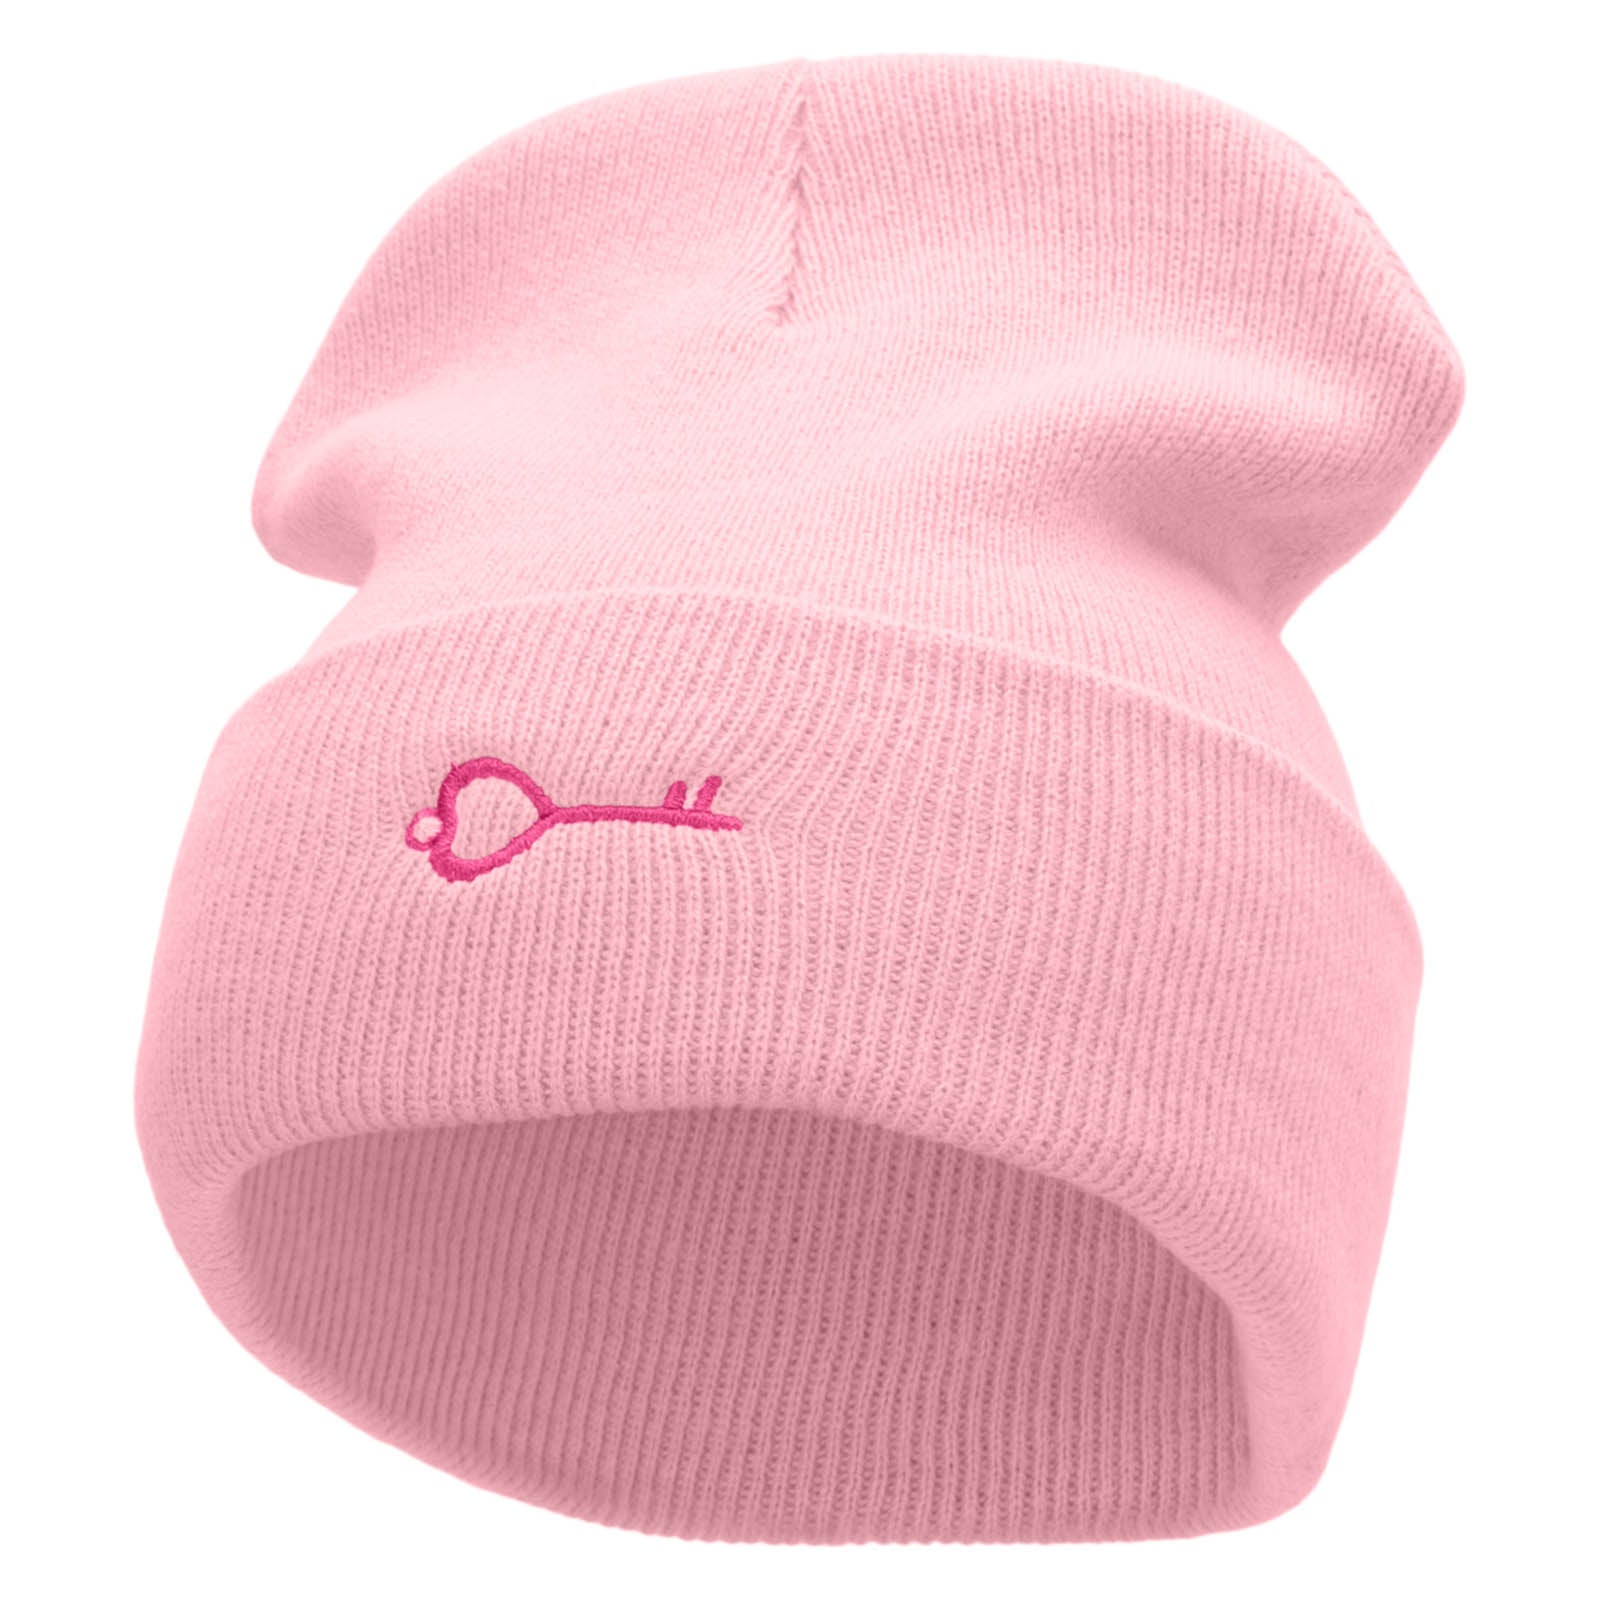 Key To Love Embroidered 12 Inch Solid Long Beanie Made in USA - Lt Pink OSFM